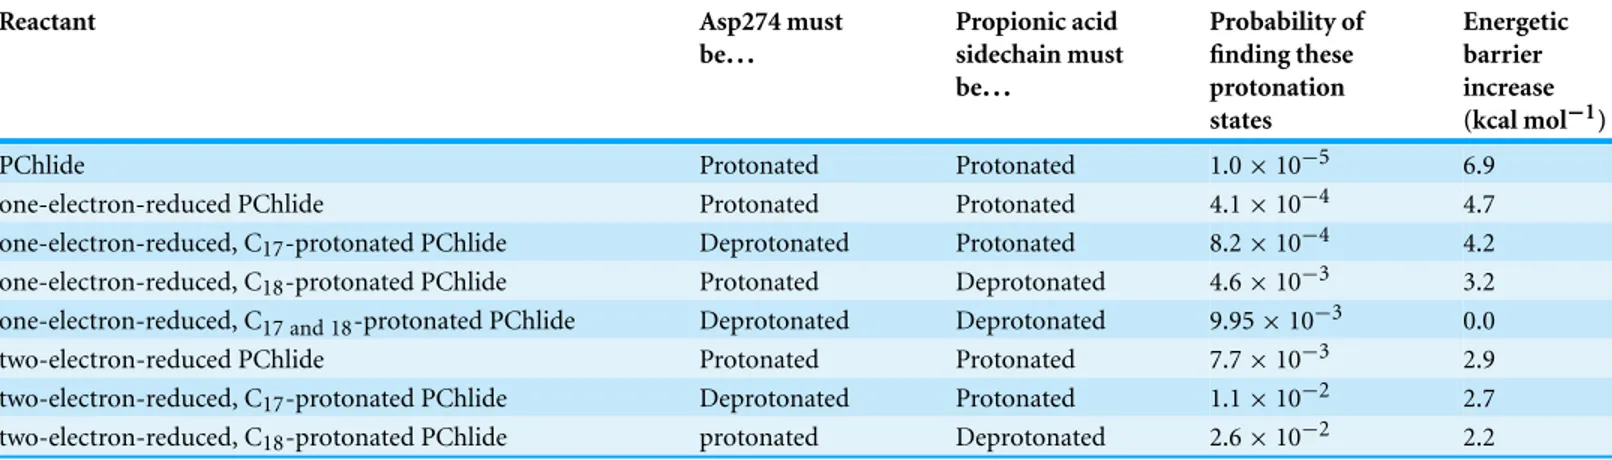 Table 4 Energetic barrier increases (kcal mol −1 ) at pH = 7.0 caused by the non-unitary probability of finding Aps274 and the propionic acid in the appropriate protonated states.